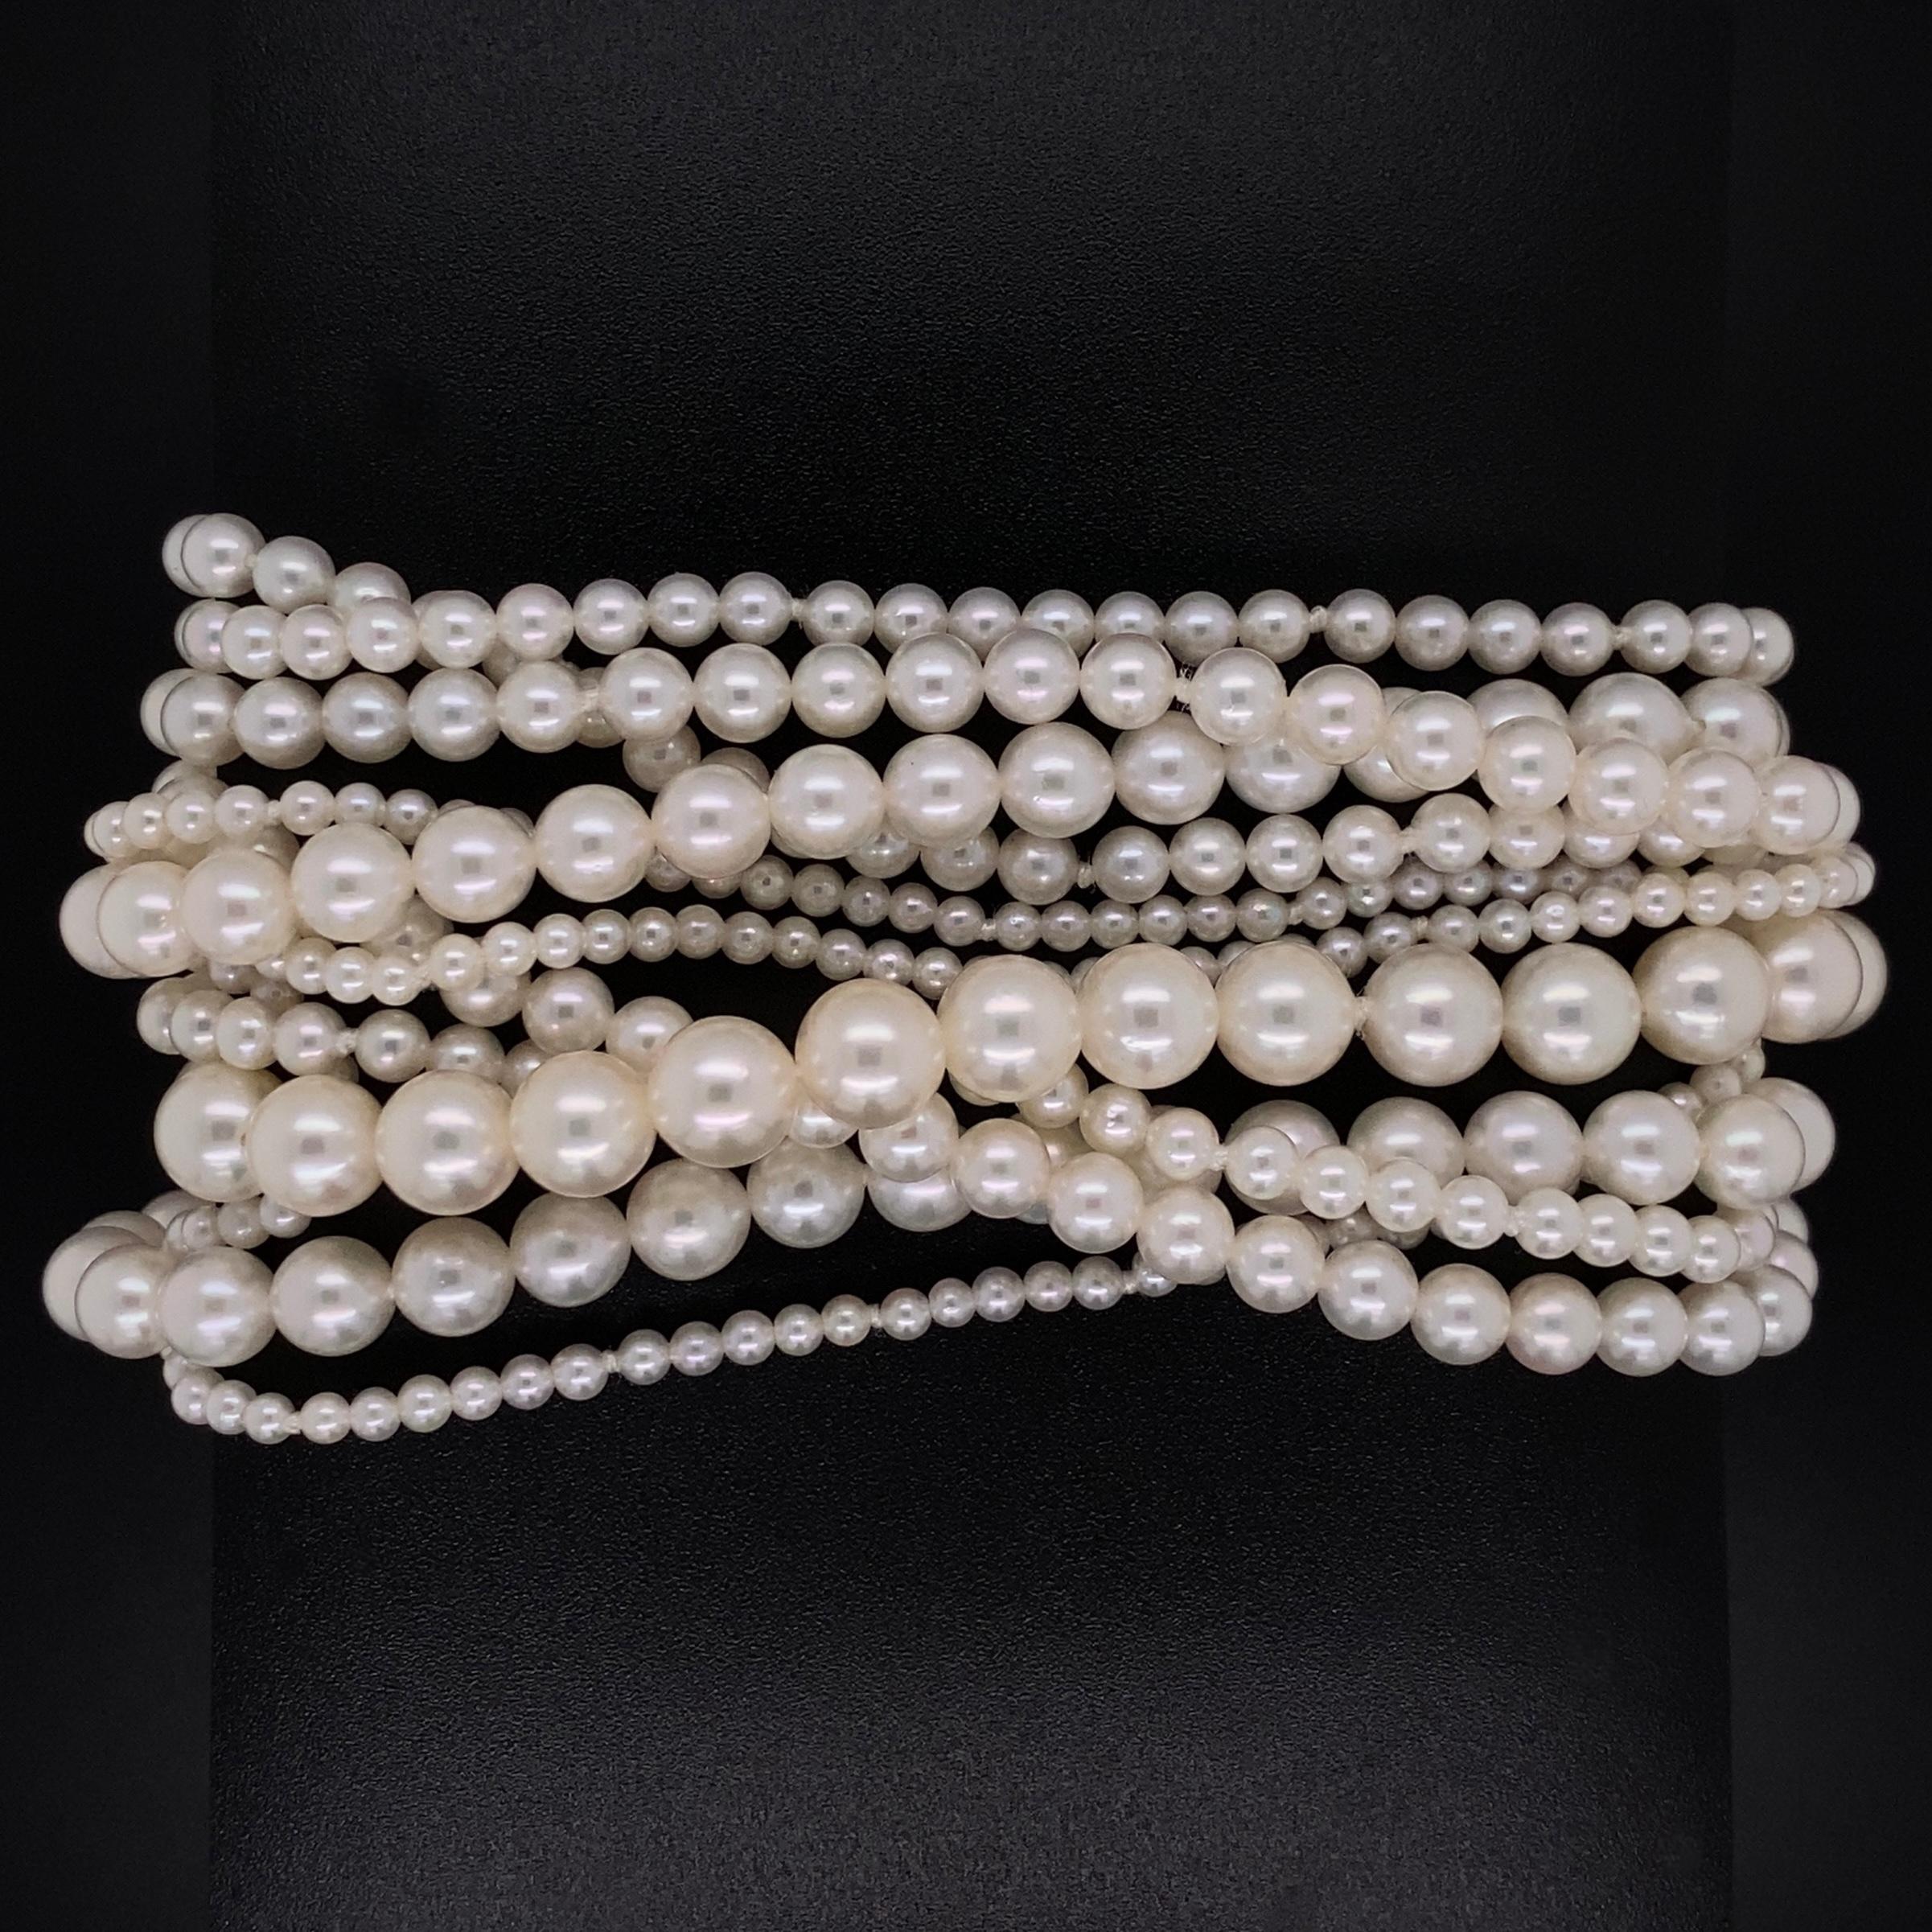 Simply Beautiful! Fine Tiffany & Co. 6.5mm-2.4mm Cultured Pearl 11 Strand Bracelet held by an 18K Yellow Gold clasp. Approx. length of Bracelet: 7.75”. Signed TIFFANY & CO. and marked 18K. More Beautiful in real time...A piece you’ll turn to time